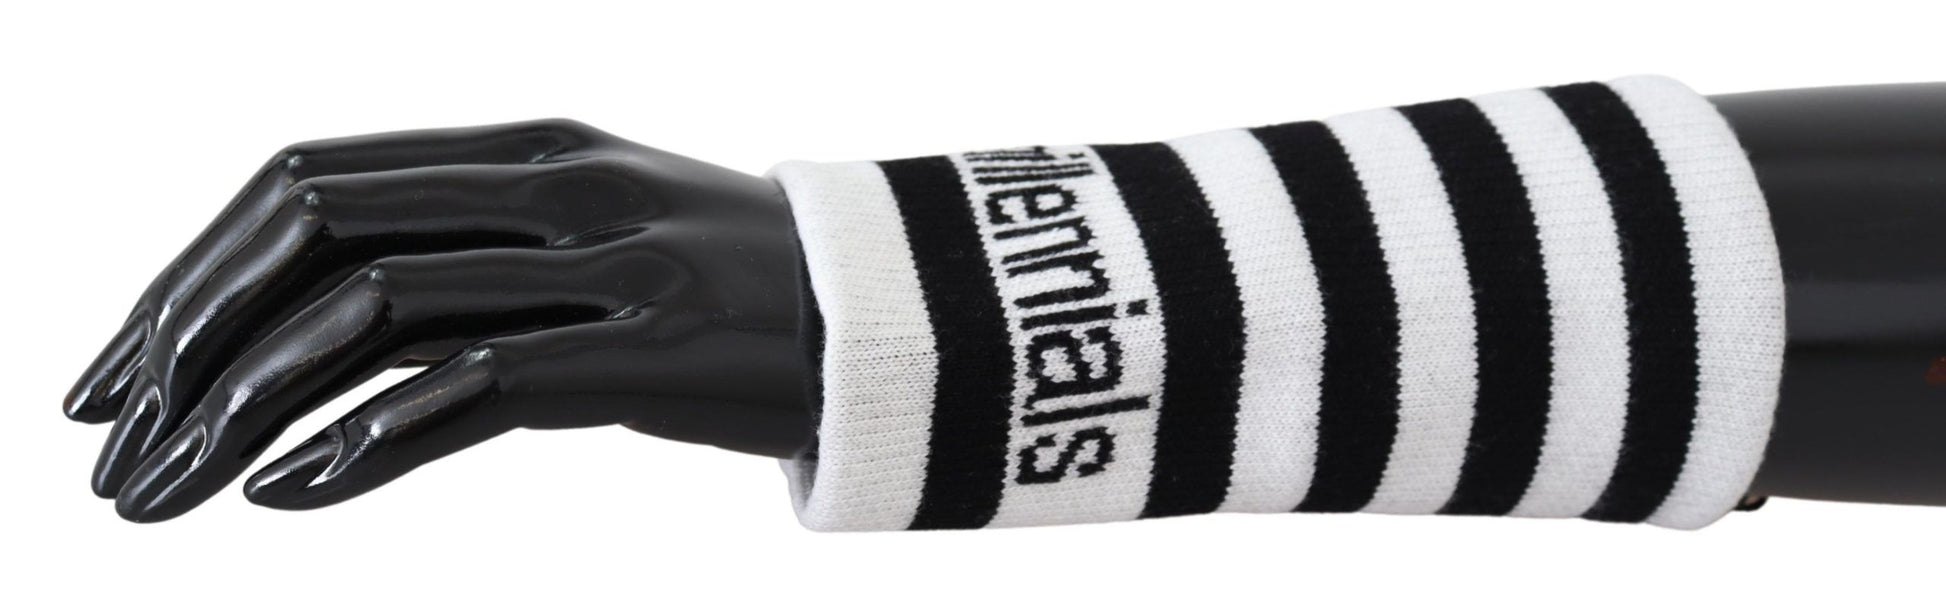 Black White Wool DGMillennials Wristband Wrap - Designed by Dolce & Gabbana Available to Buy at a Discounted Price on Moon Behind The Hill Online Designer Discount Store